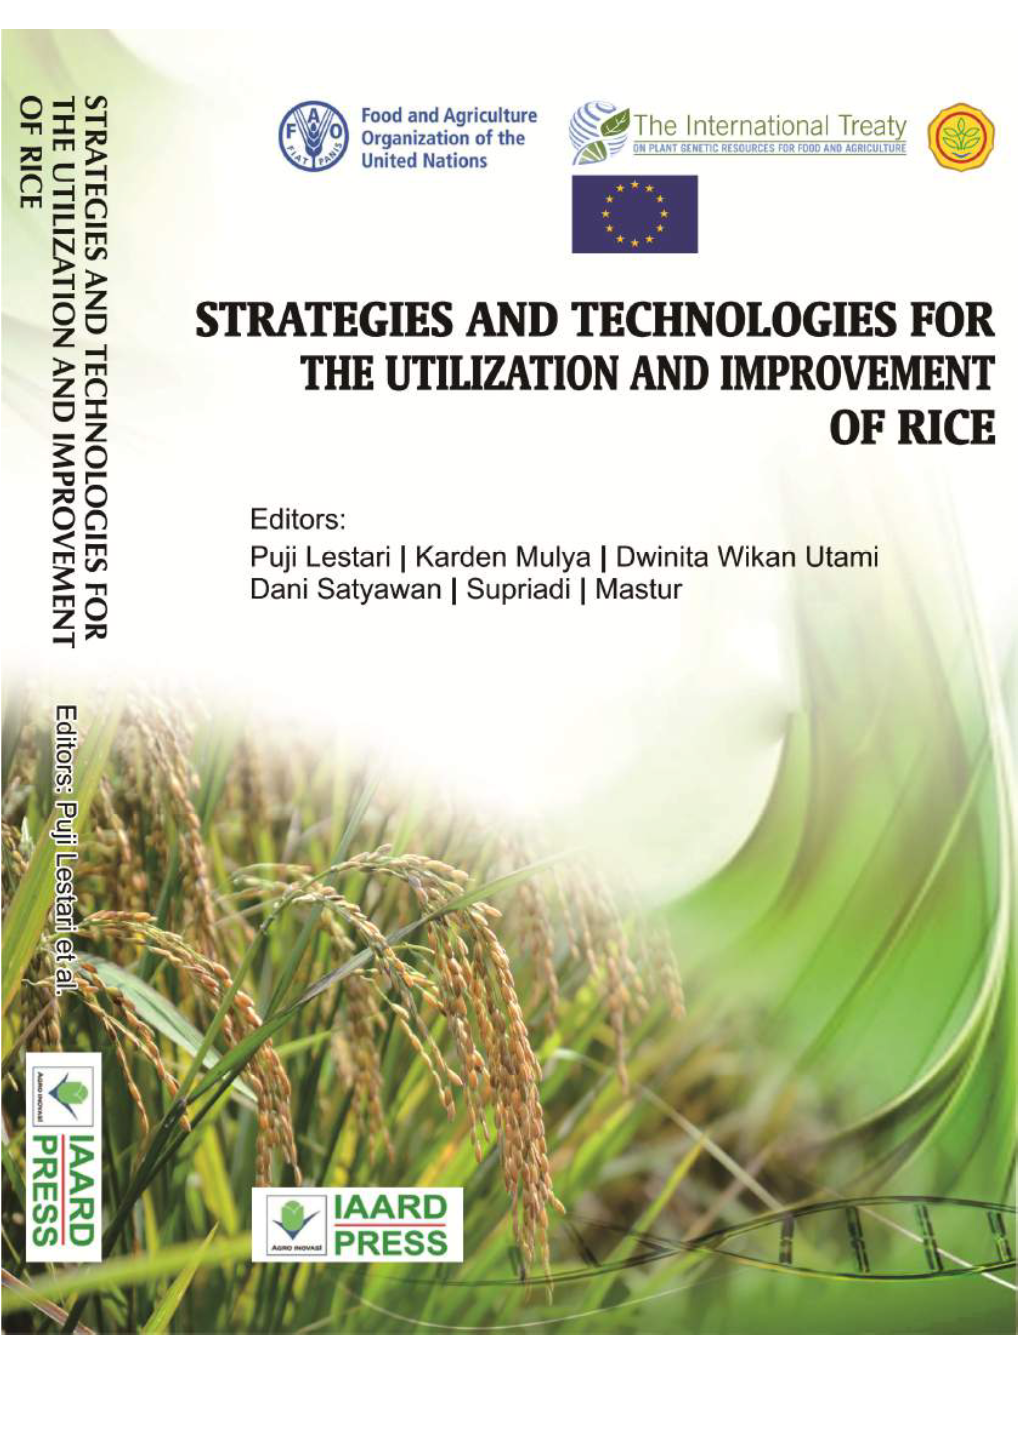 Strategies and Technologies for the Utilization and Improvement of Rice